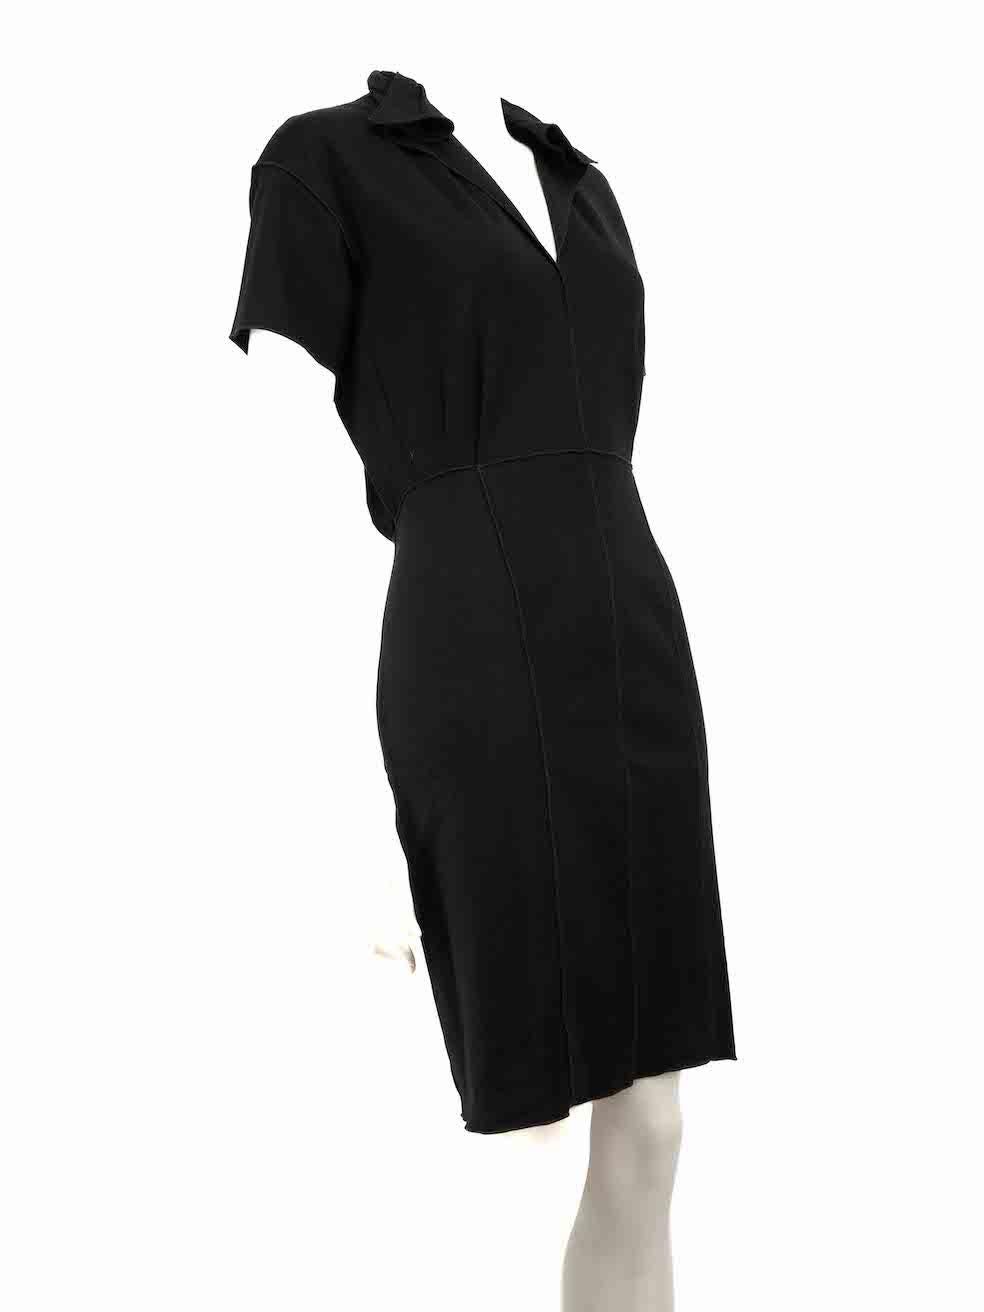 CONDITION is Very good. Minimal wear to dress is evident. Minimal wear to the collar is seen with slight discolouration marks caused by the creasing of the material on this used Yves Saint Laurent designer resale item.
 
 
 
 Details
 
 
 Black
 
